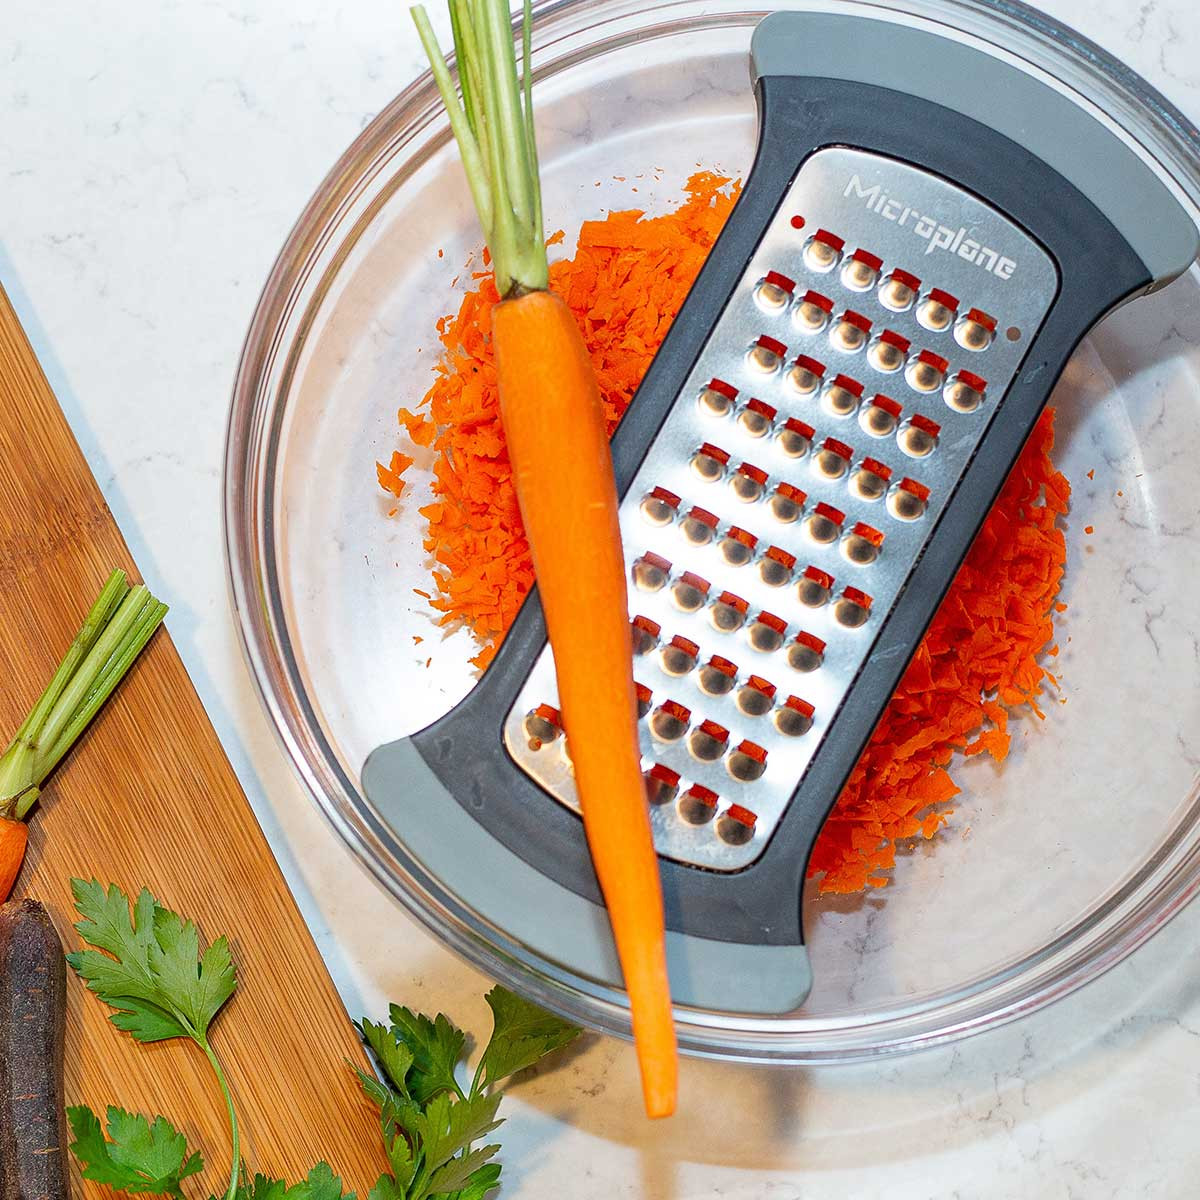 STORIED home Gold Stainless Steel Grater - Perfect for Grating Vegetables -  Easy to Use - Fits Any Decor in the Kitchen Tools department at